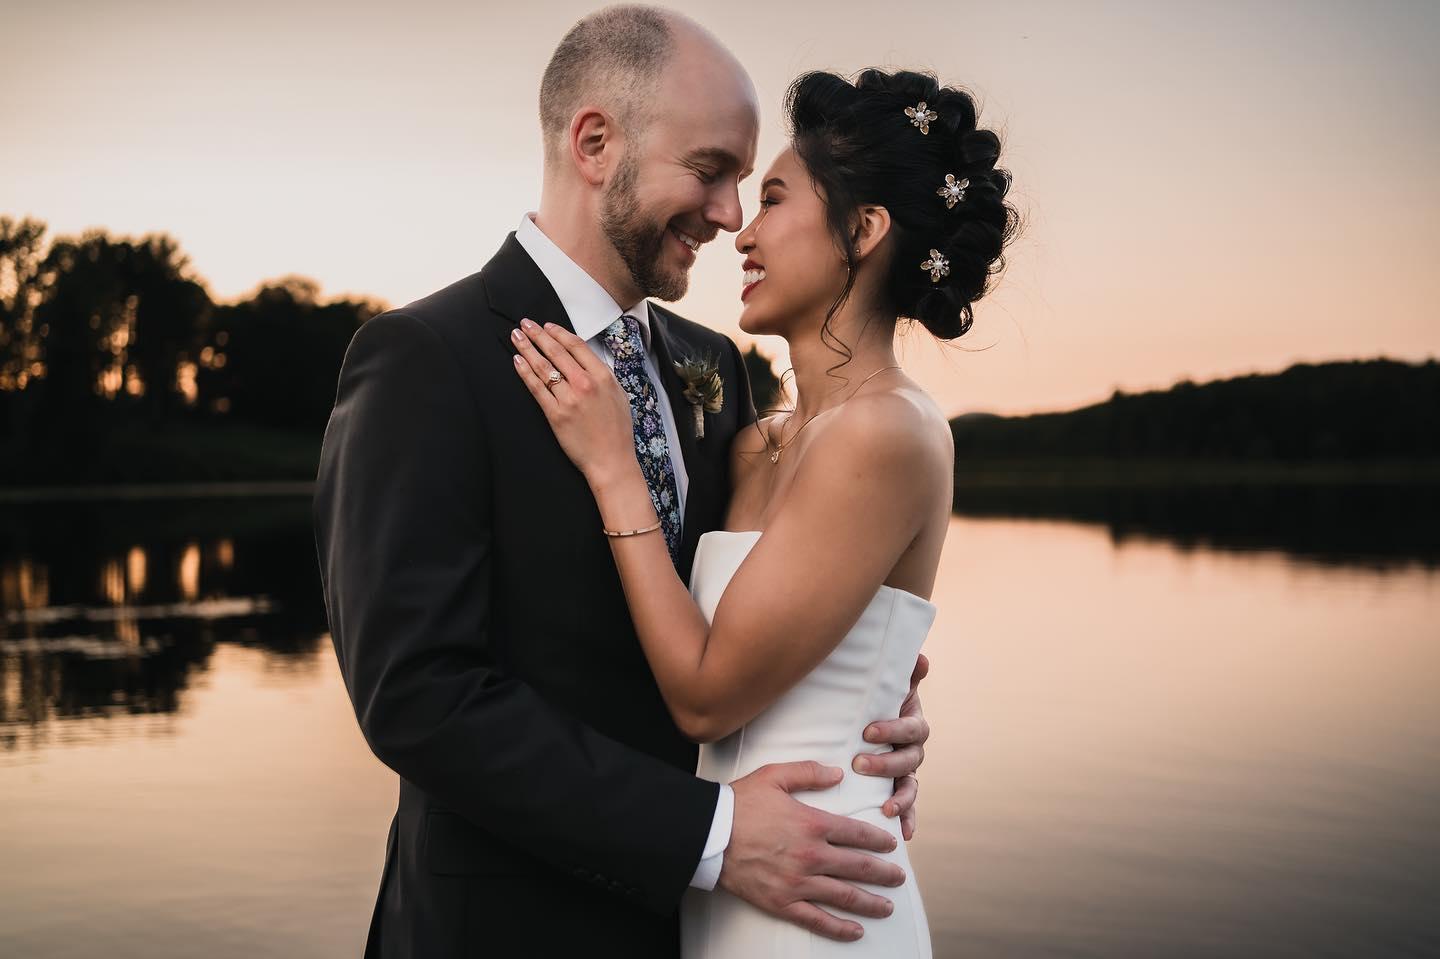 A Mid-Summer Dream: Rebecca and Nathan's Joyous Wedding in Pittsfield, Massachusetts